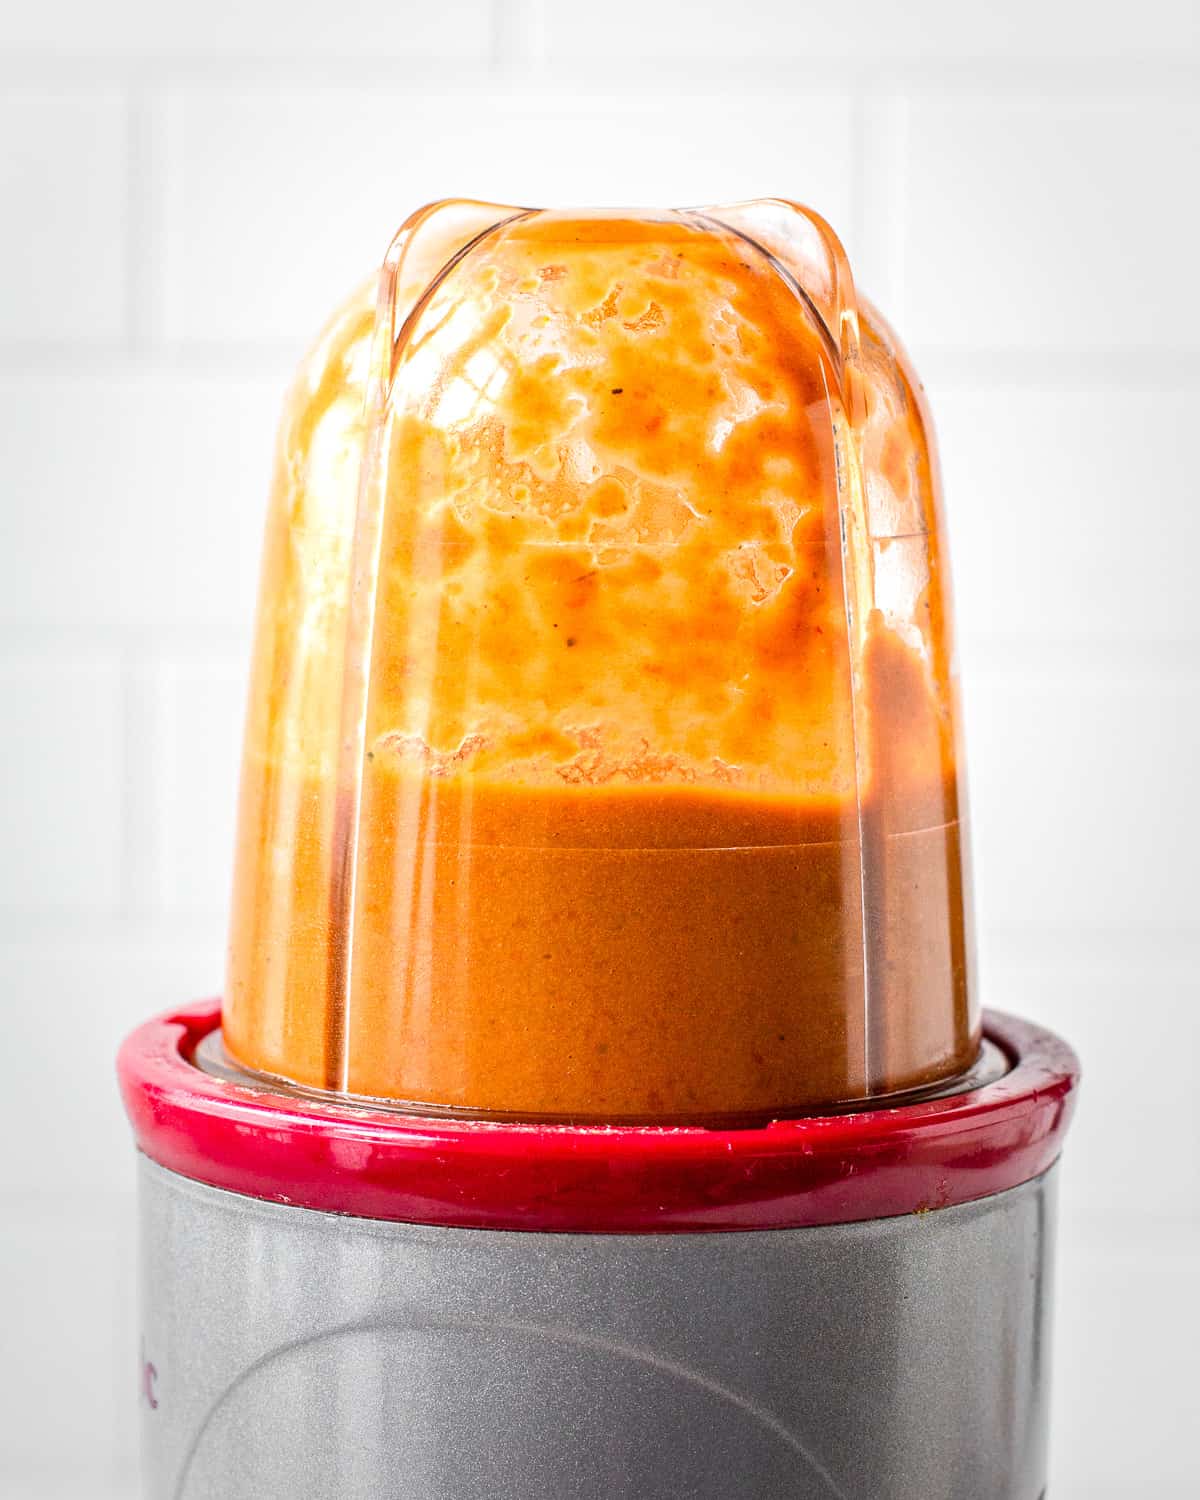 Orange dressing made from sun-dried tomatoes and capers in a blender jar.